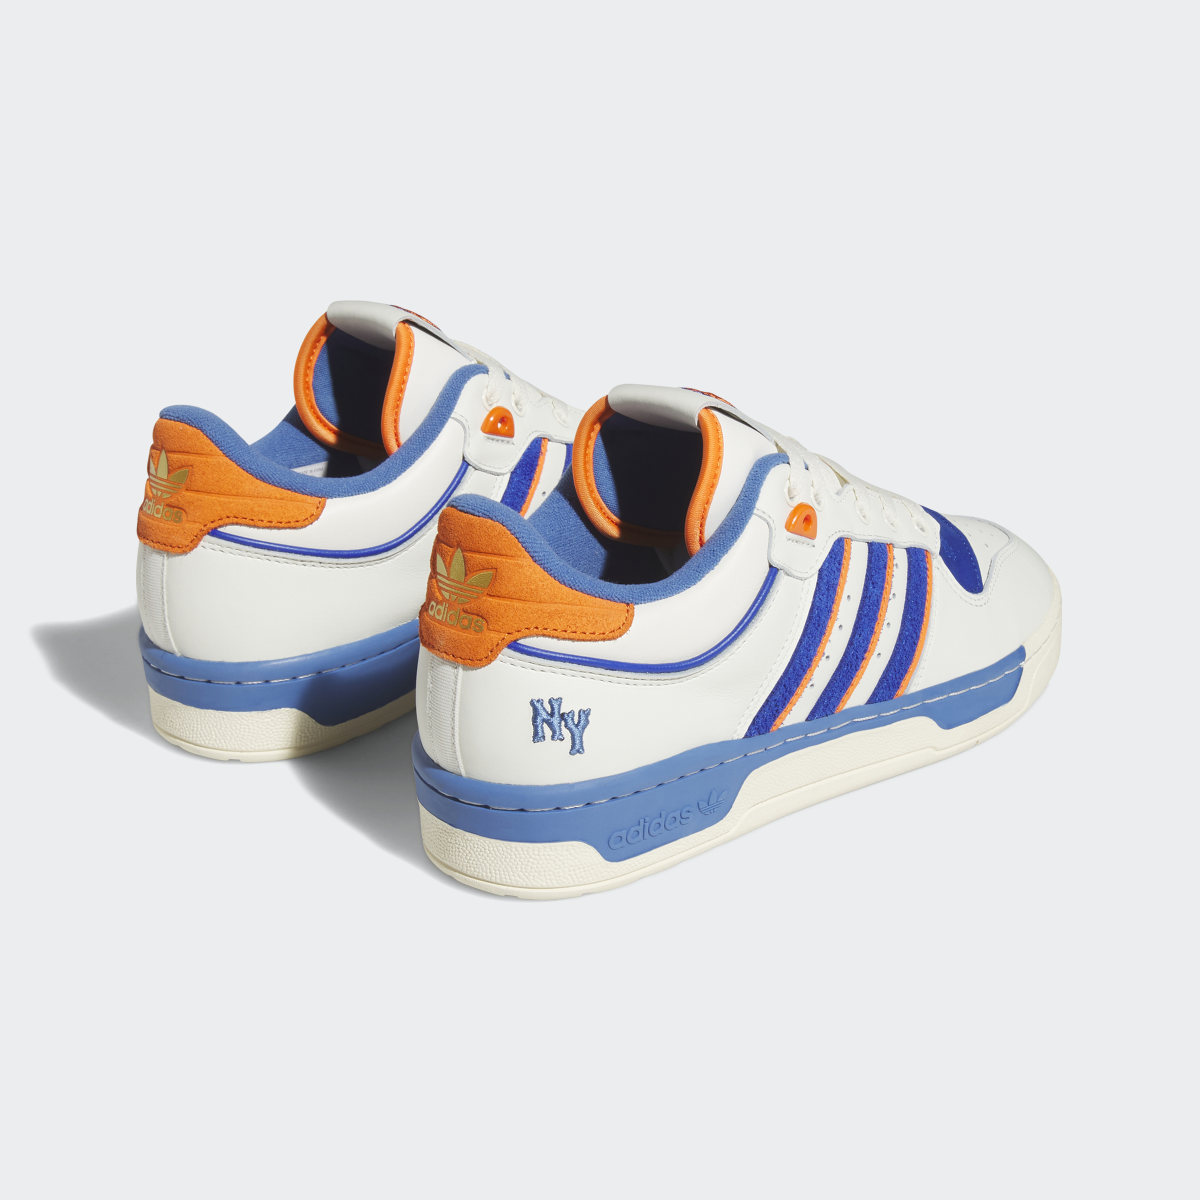 Adidas Rivalry Low 86 Shoes. 6